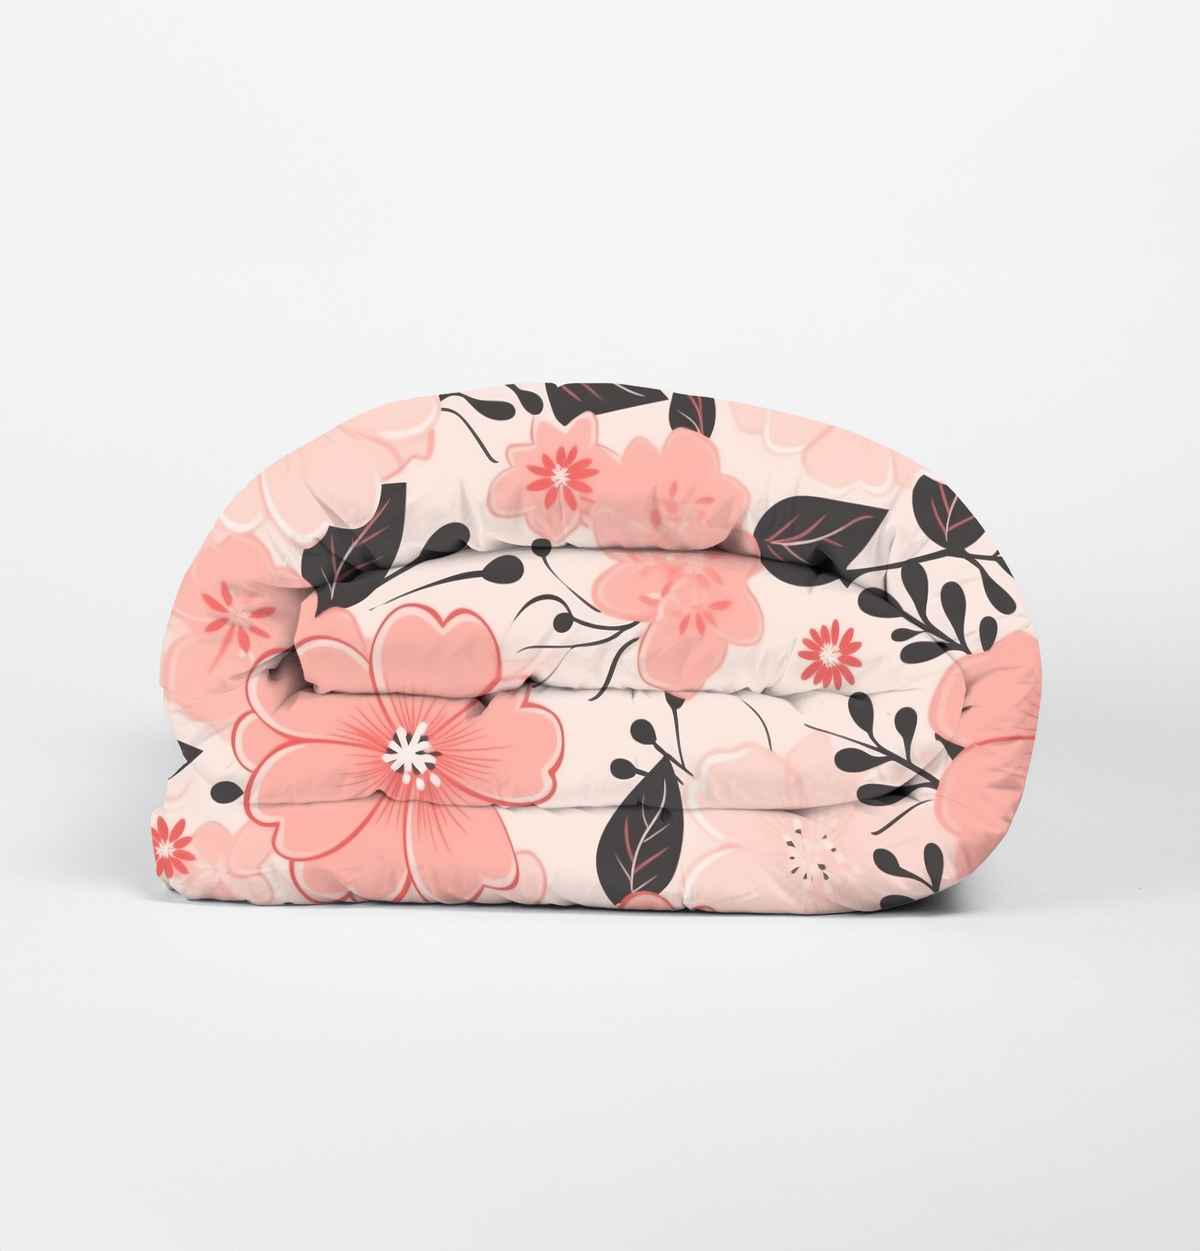 Pink Blossom Floral Duvet Cover | Hypoallergenic - Allergy Friendly - Naturally Free